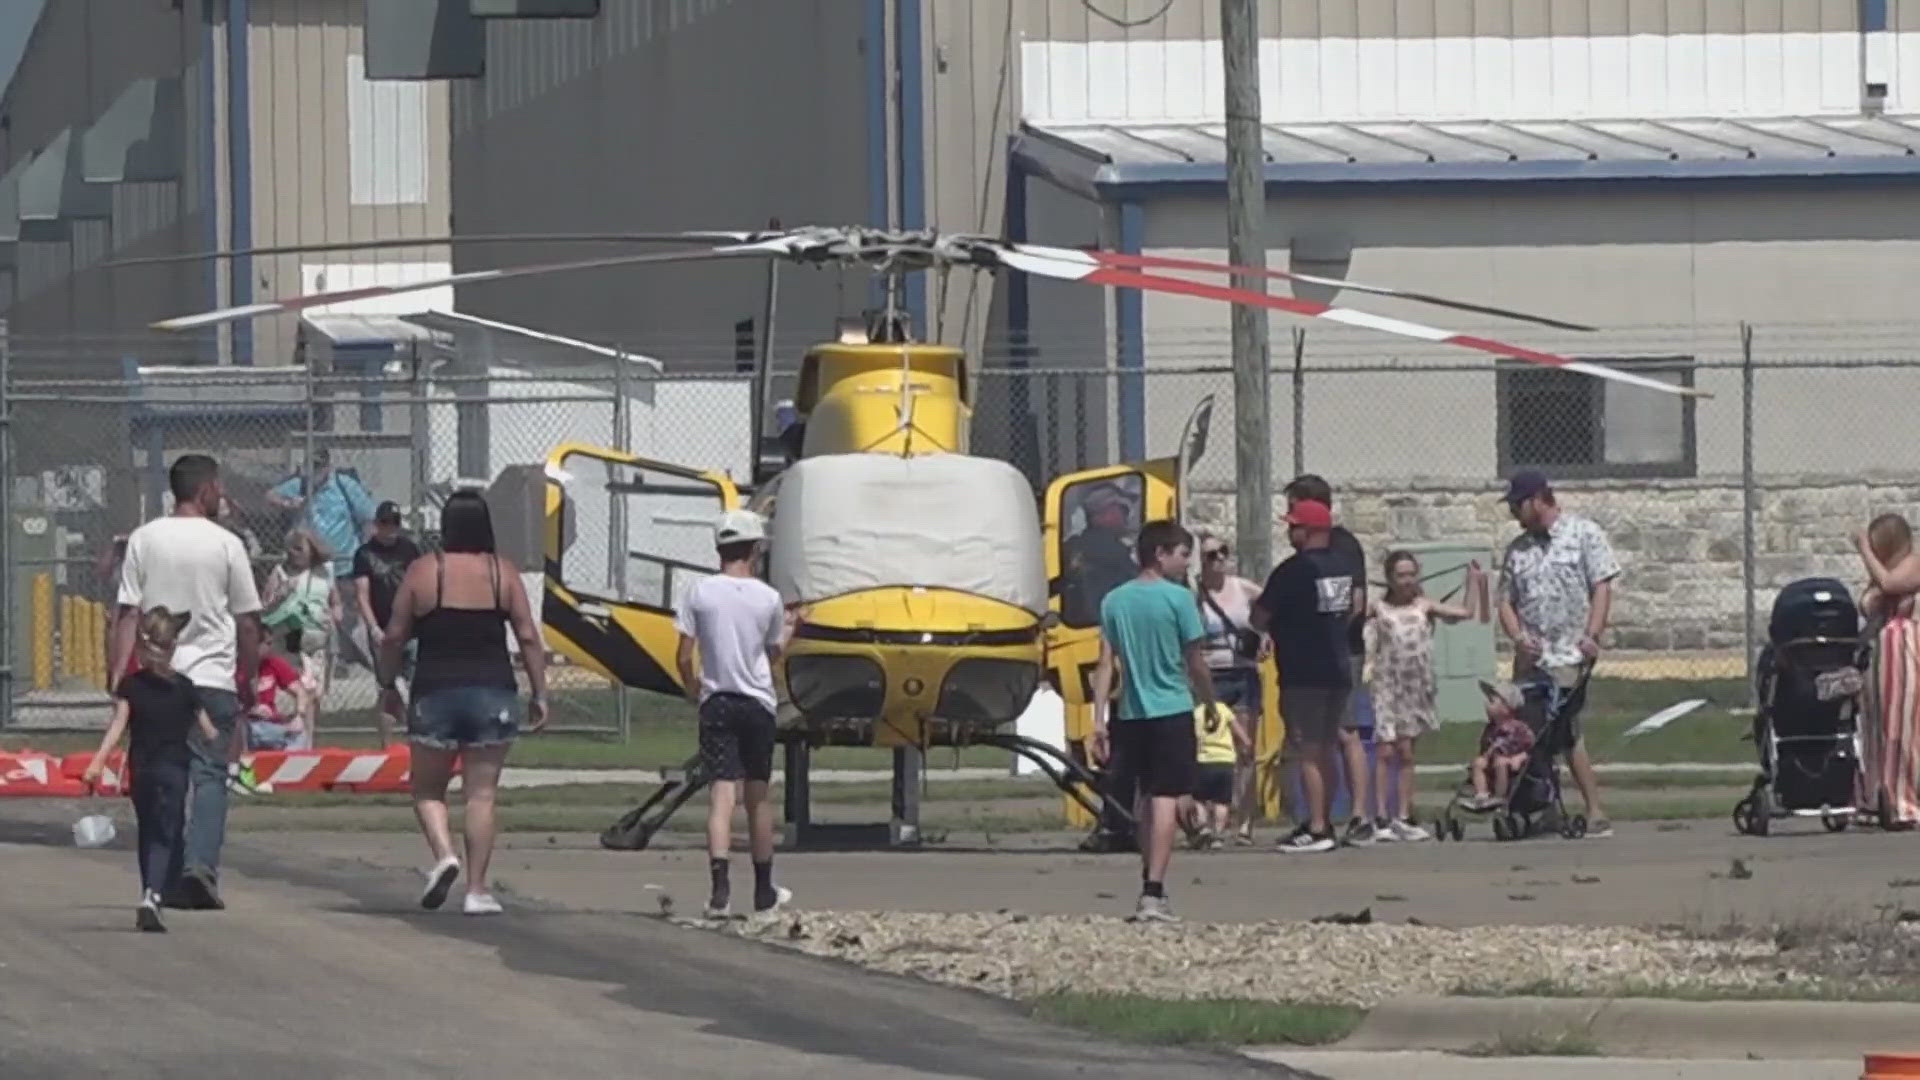 Hundreds flocked to the Draughton-MIller Airport Sunday for the show.